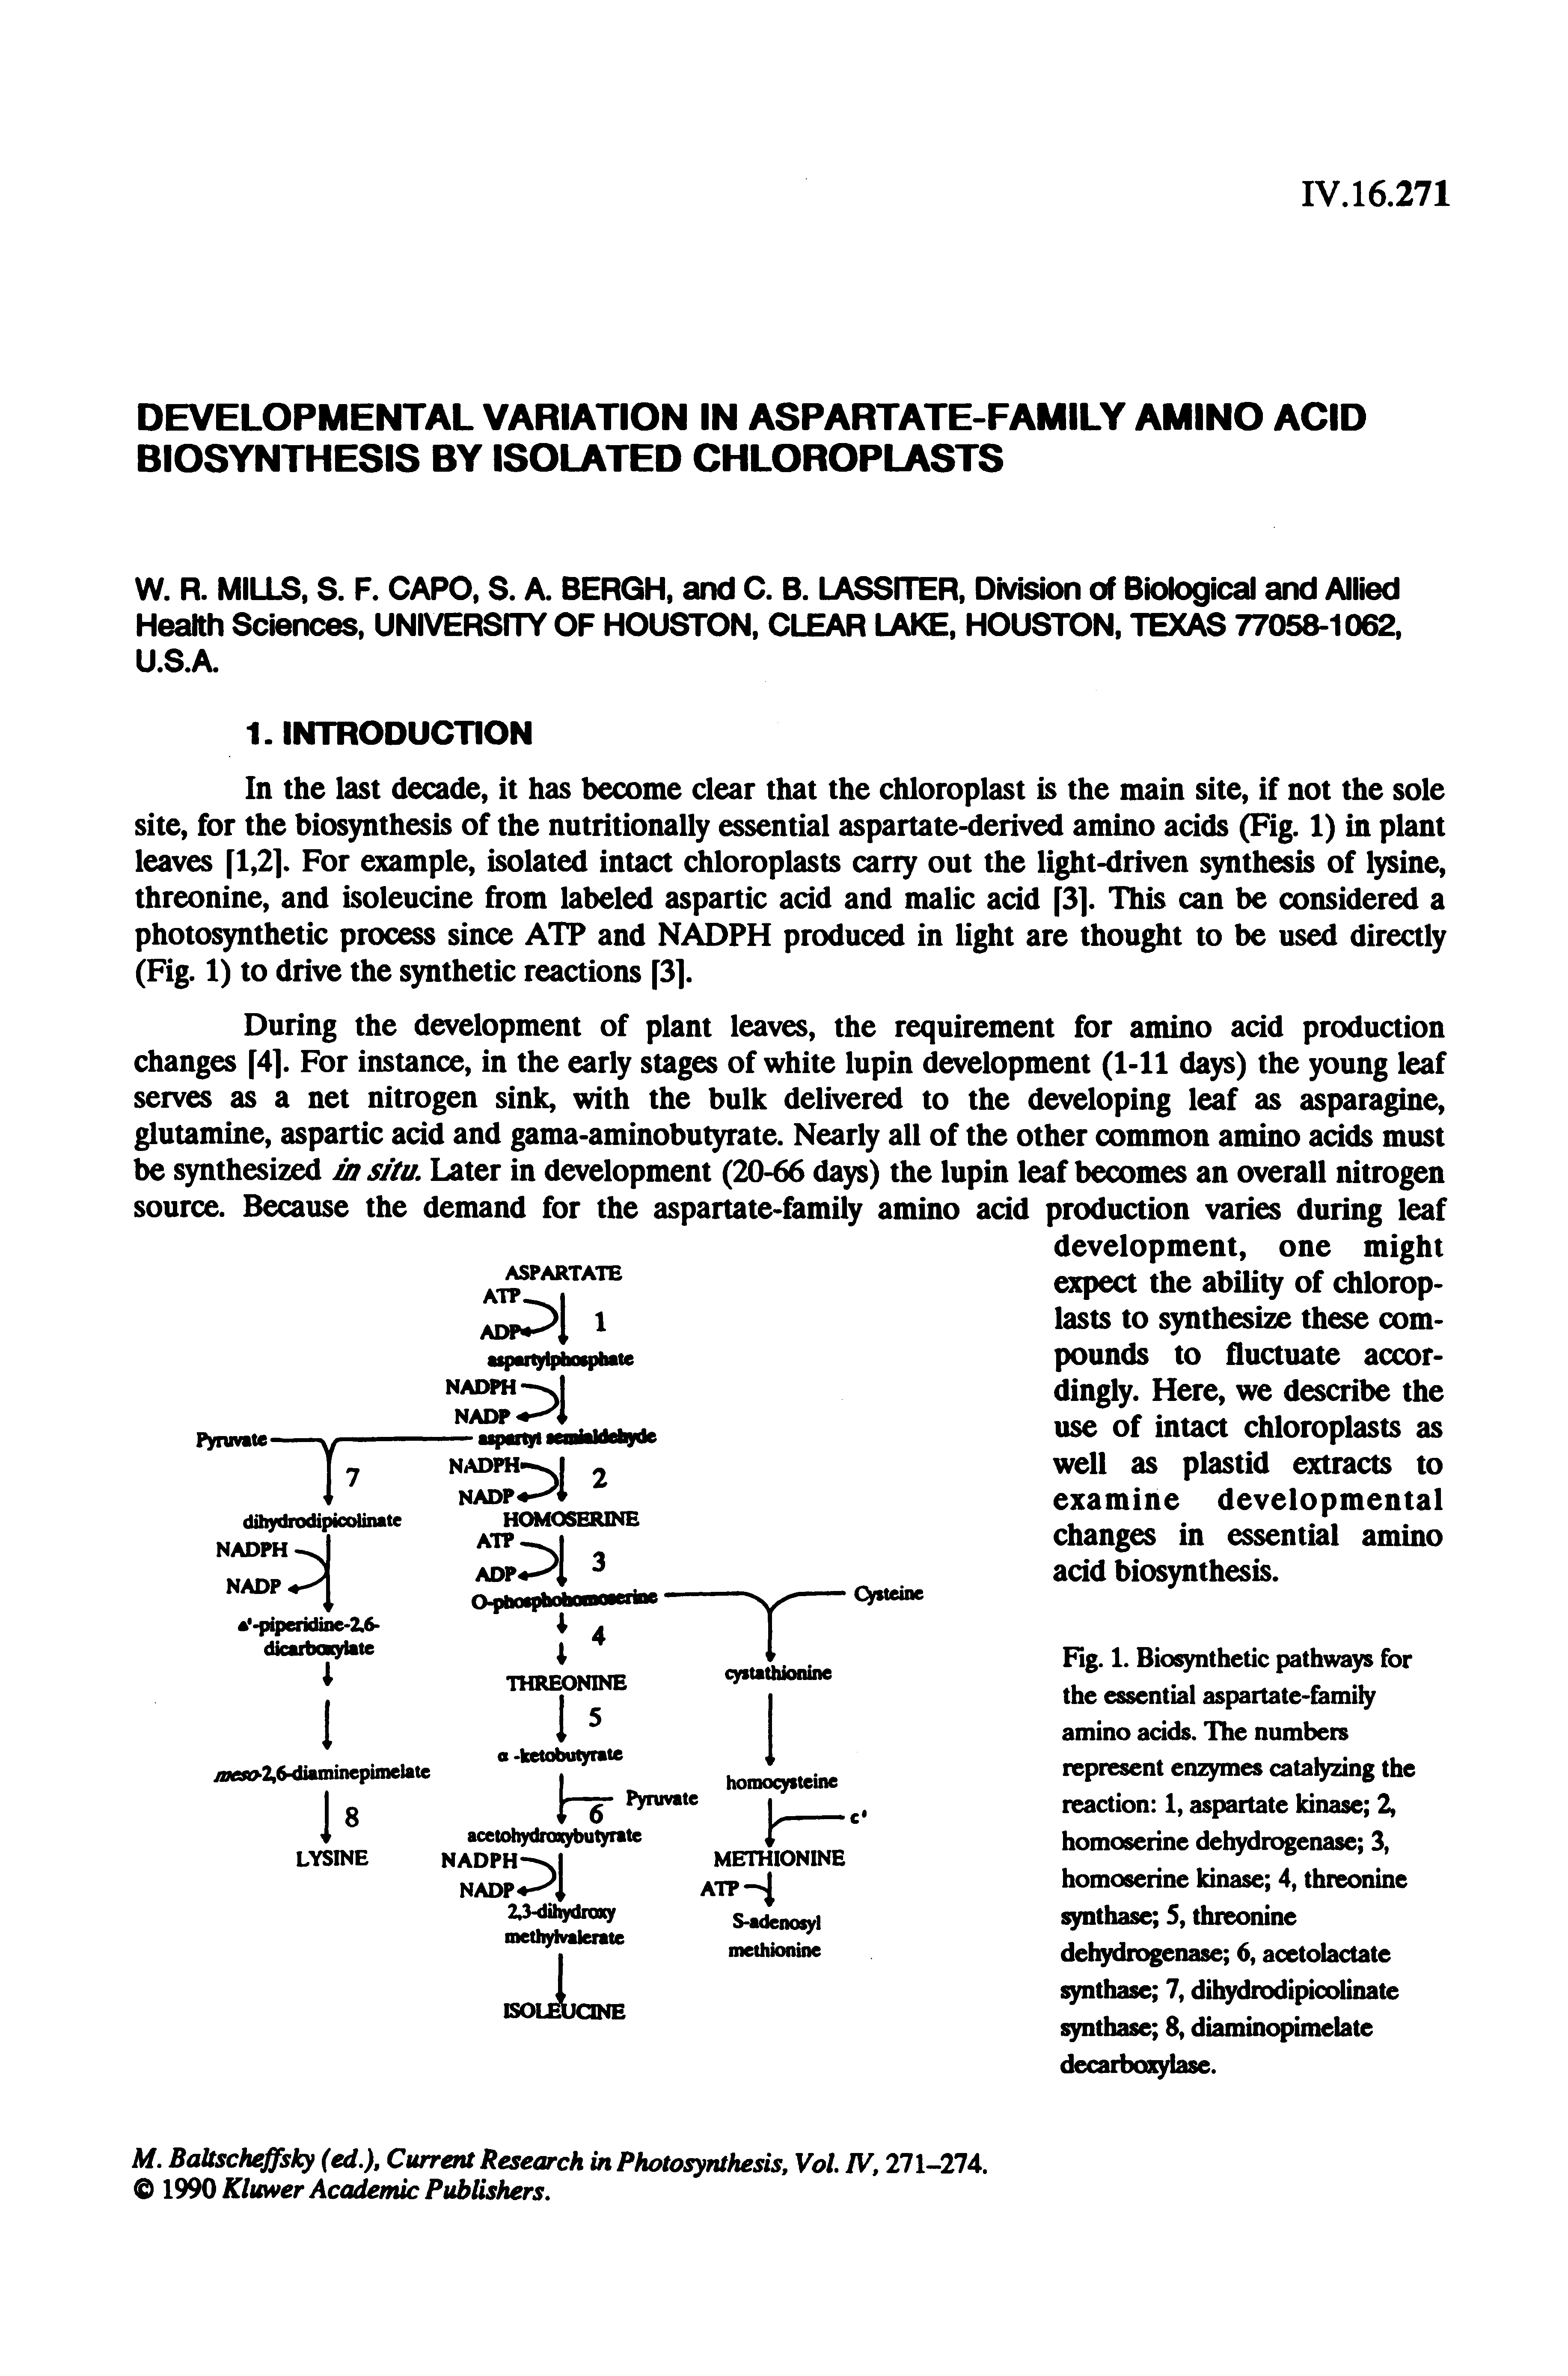 Fig. 1. Bio thetic pathways for the essential aspartate-family amino adds. The numbers represent enzymes catalyzing the reaction 1, aspartate kinase 2, homoserine dehydrogenase 3, homoserine kinase 4, threonine thase 5, threonine dehydrogenase 6, acetolactate thase 7, dihydrodipicolinate thase 8, diaminopimelate decarboiylase.